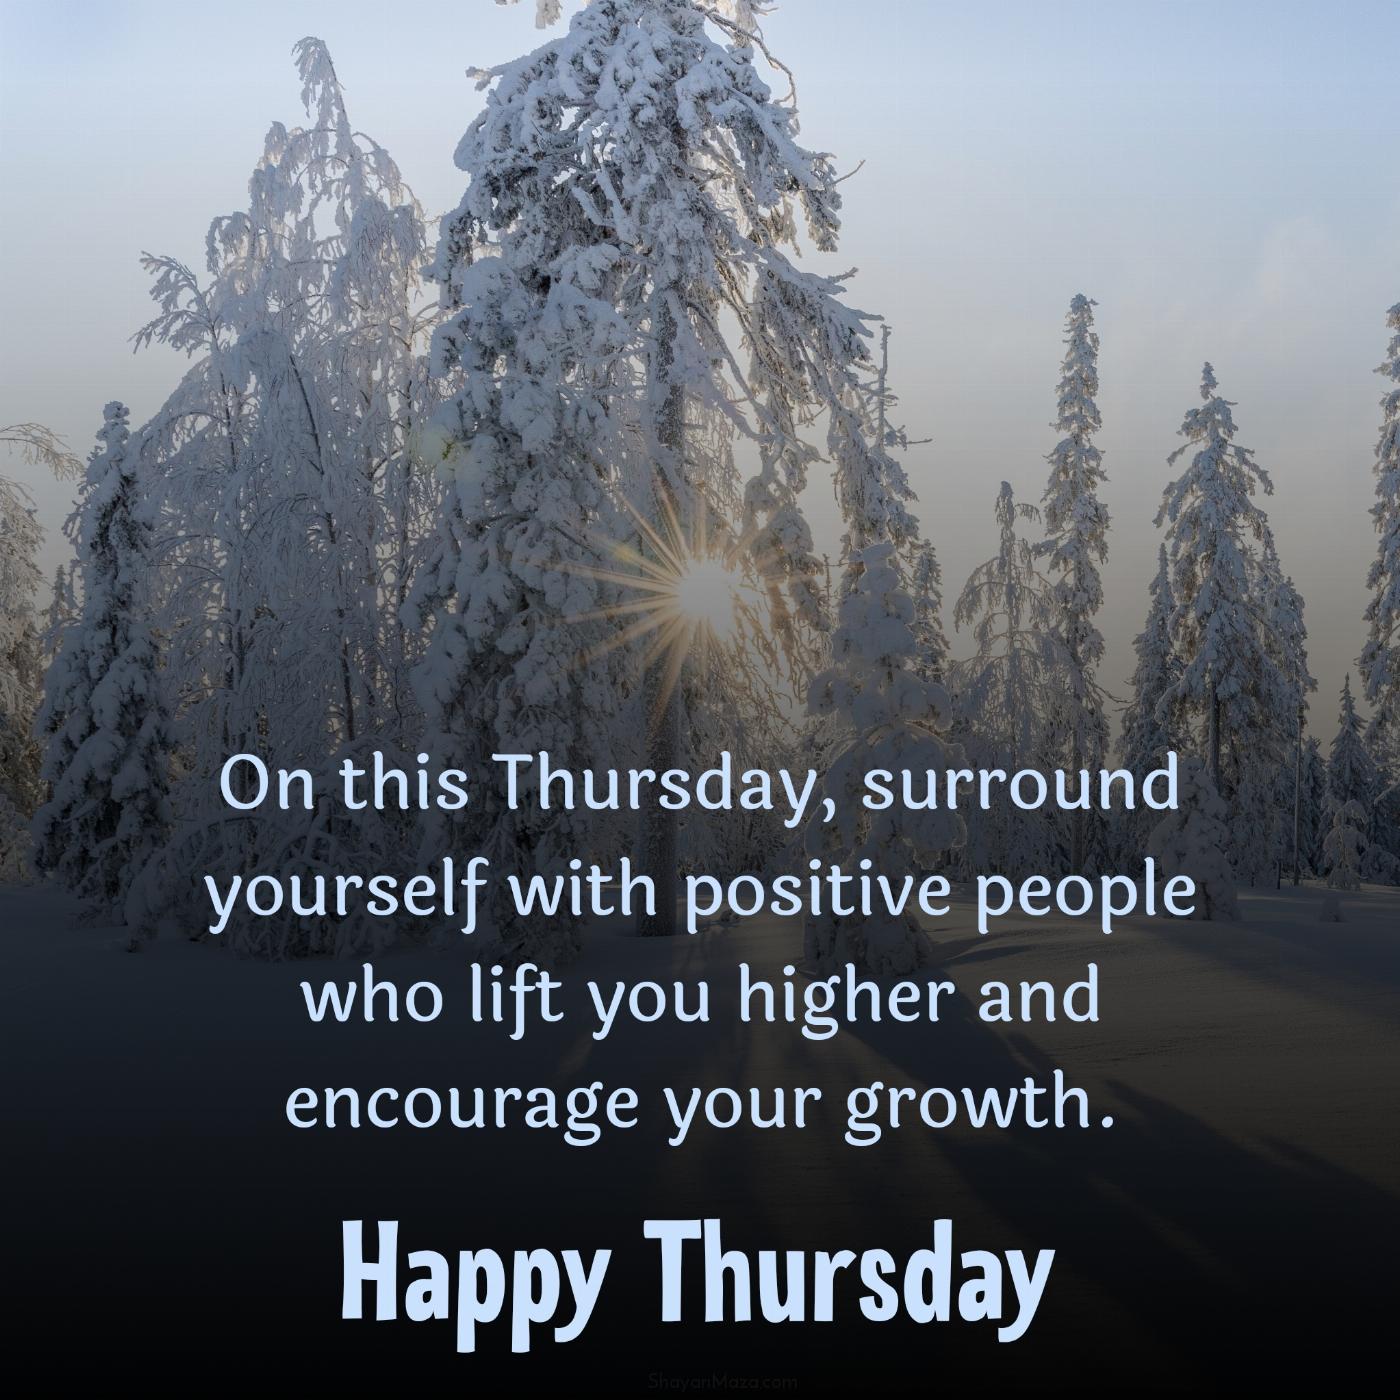 On this Thursday surround yourself with positive people